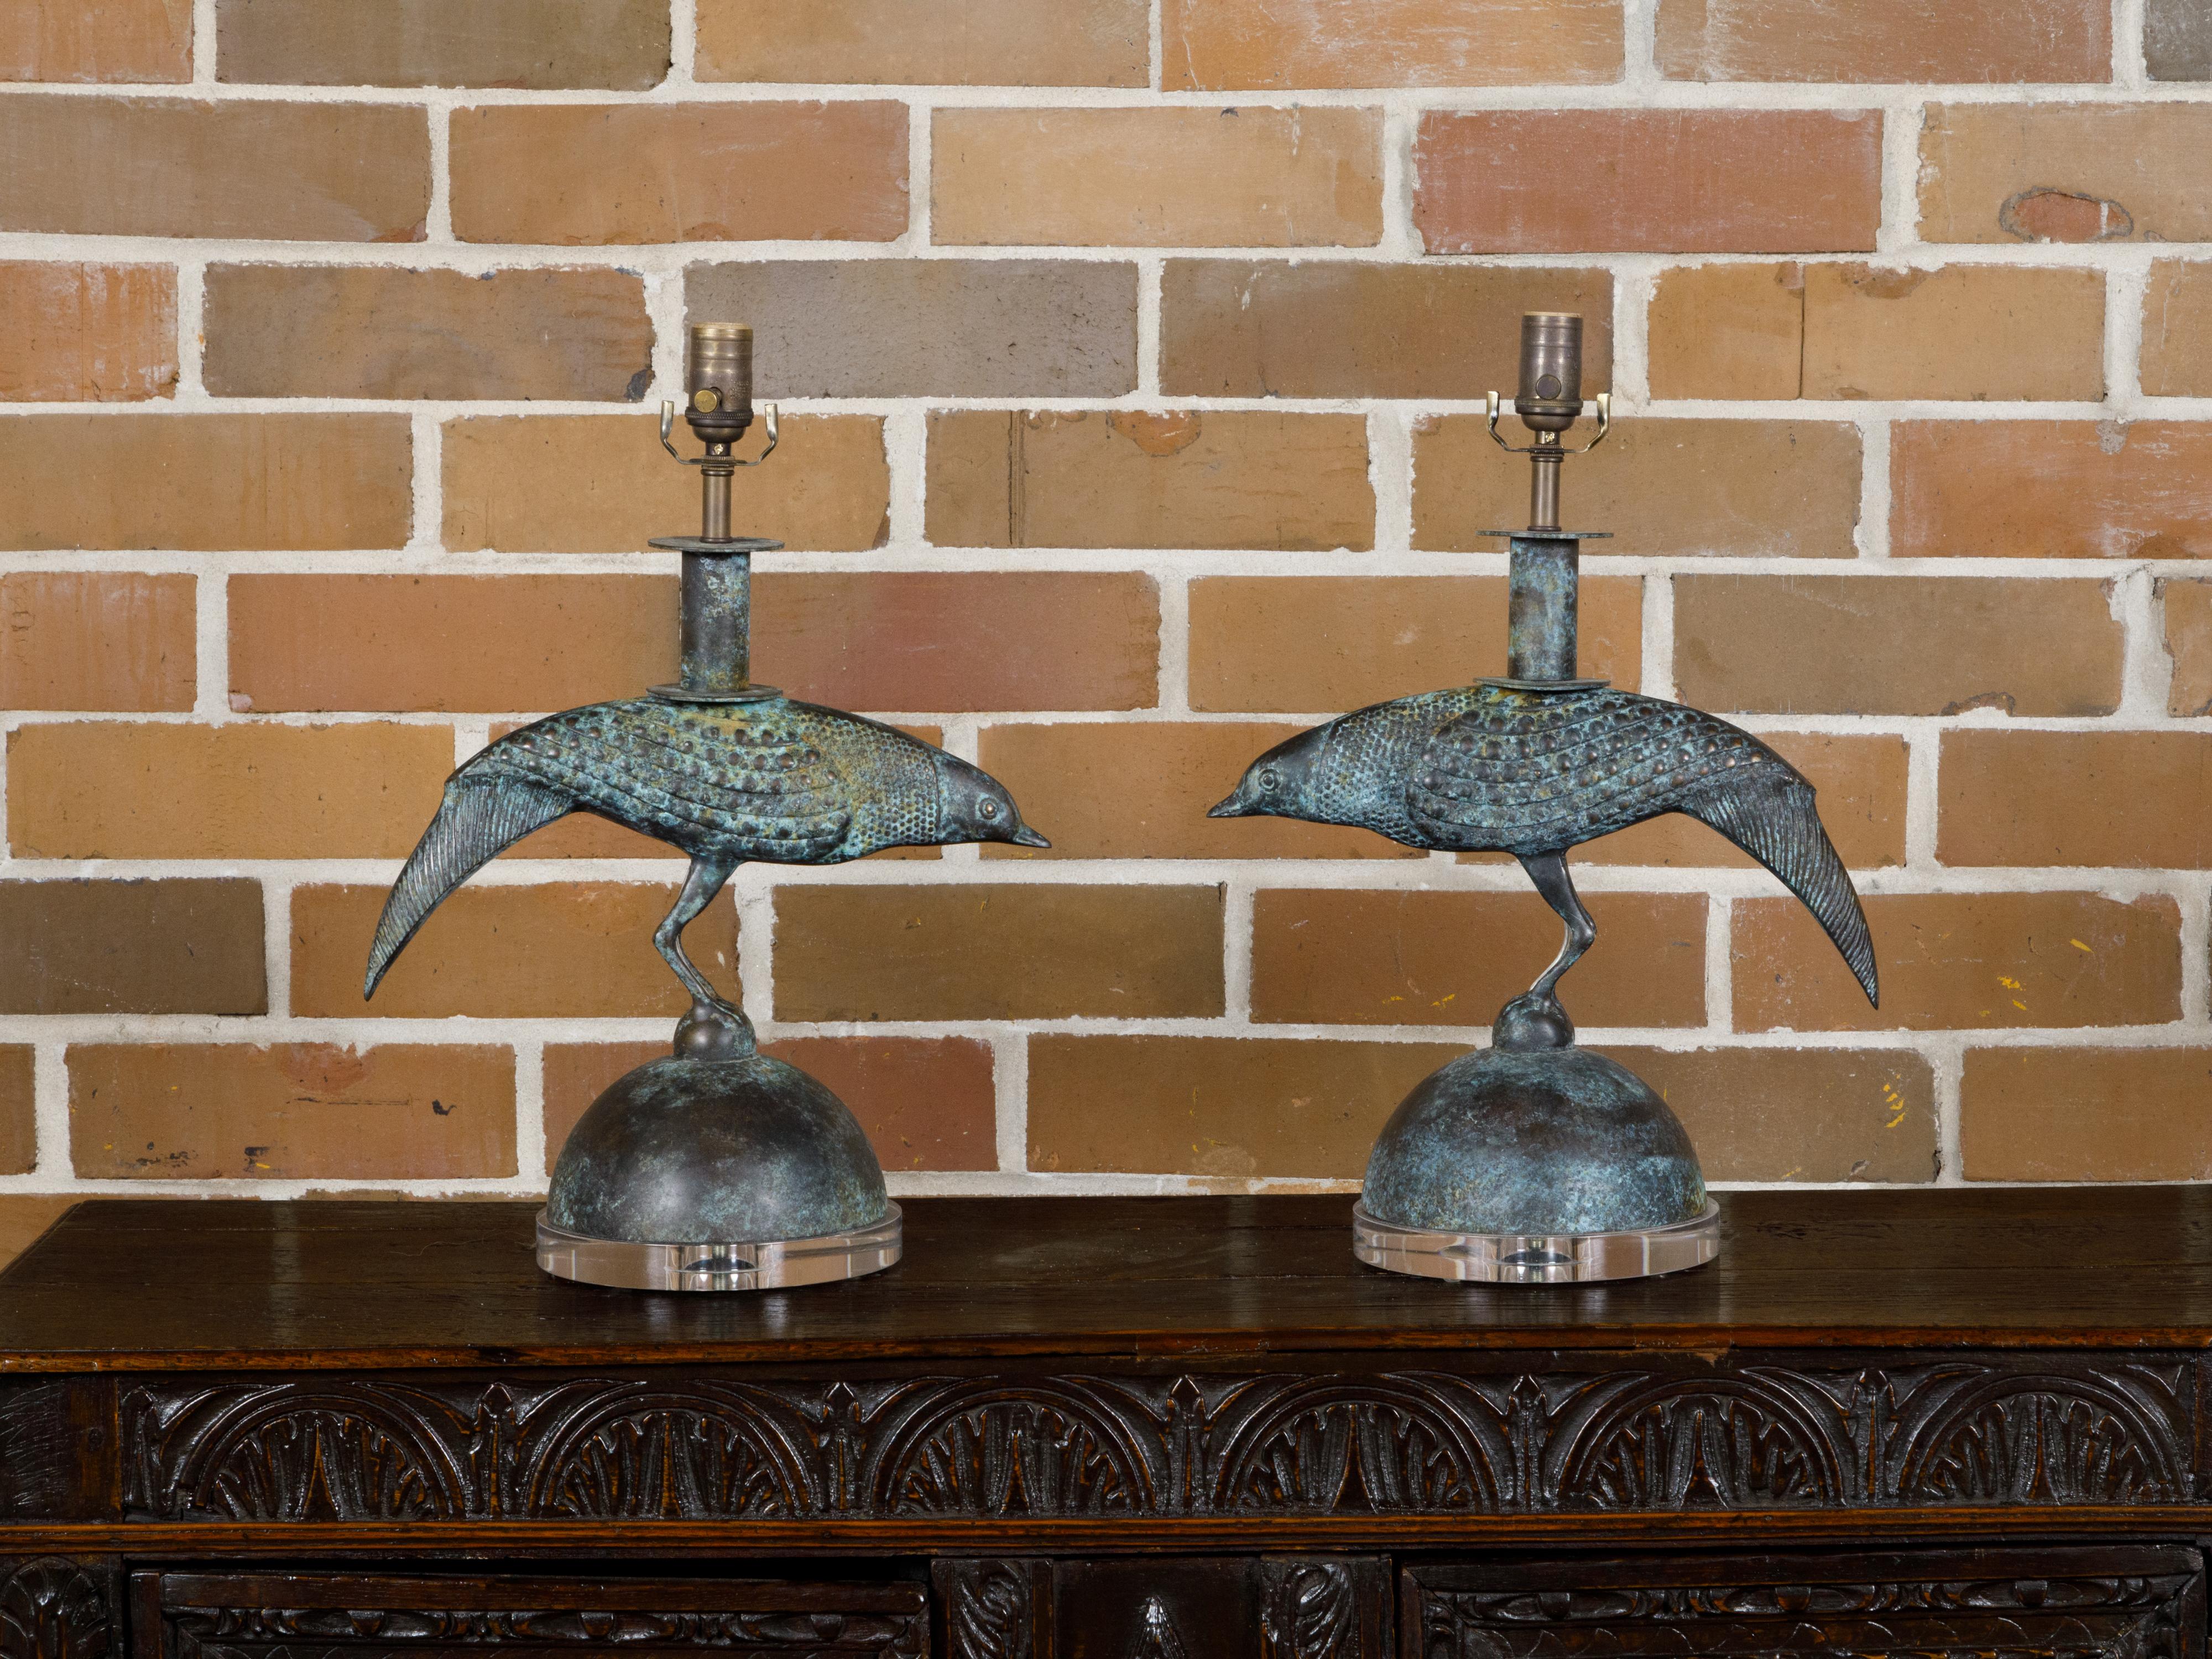 A pair of French Midcentury bronze table lamps from circa 1950 depicting birds with verdigris patina and resting on circular lucite bases. These French Midcentury table lamps, dating back to circa 1950, are a splendid representation of post-war